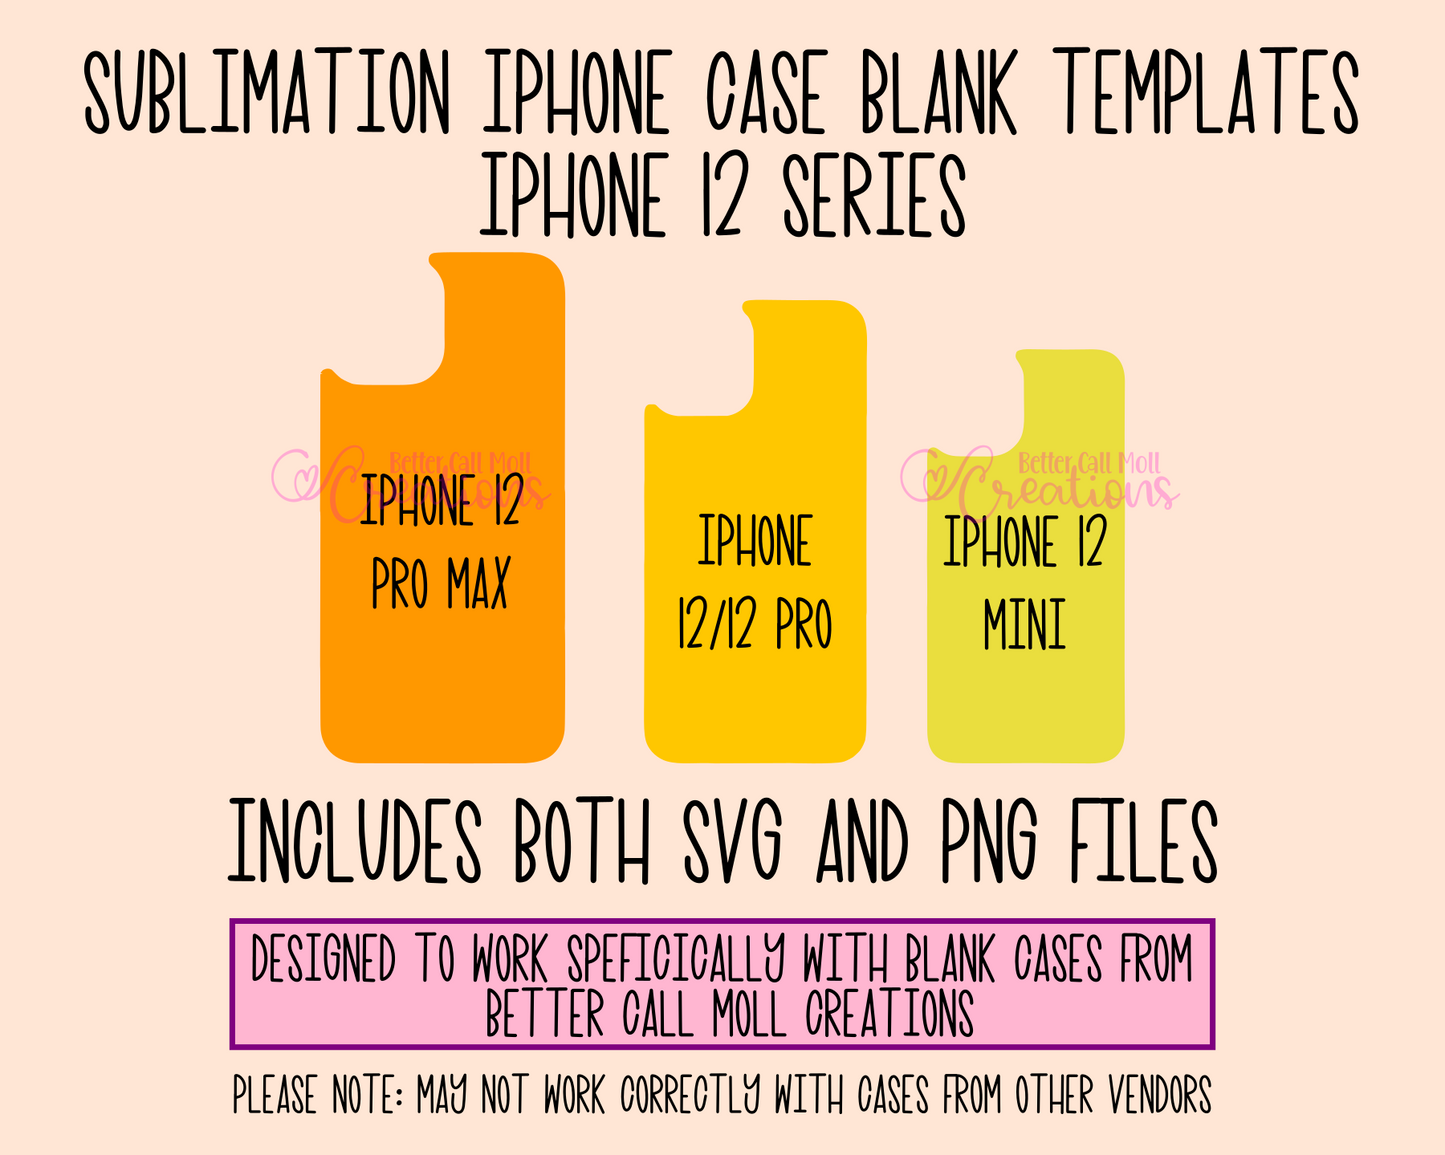 Templates for Sublimation Blank iPhone 12 Series Cases | Instant Digital Download